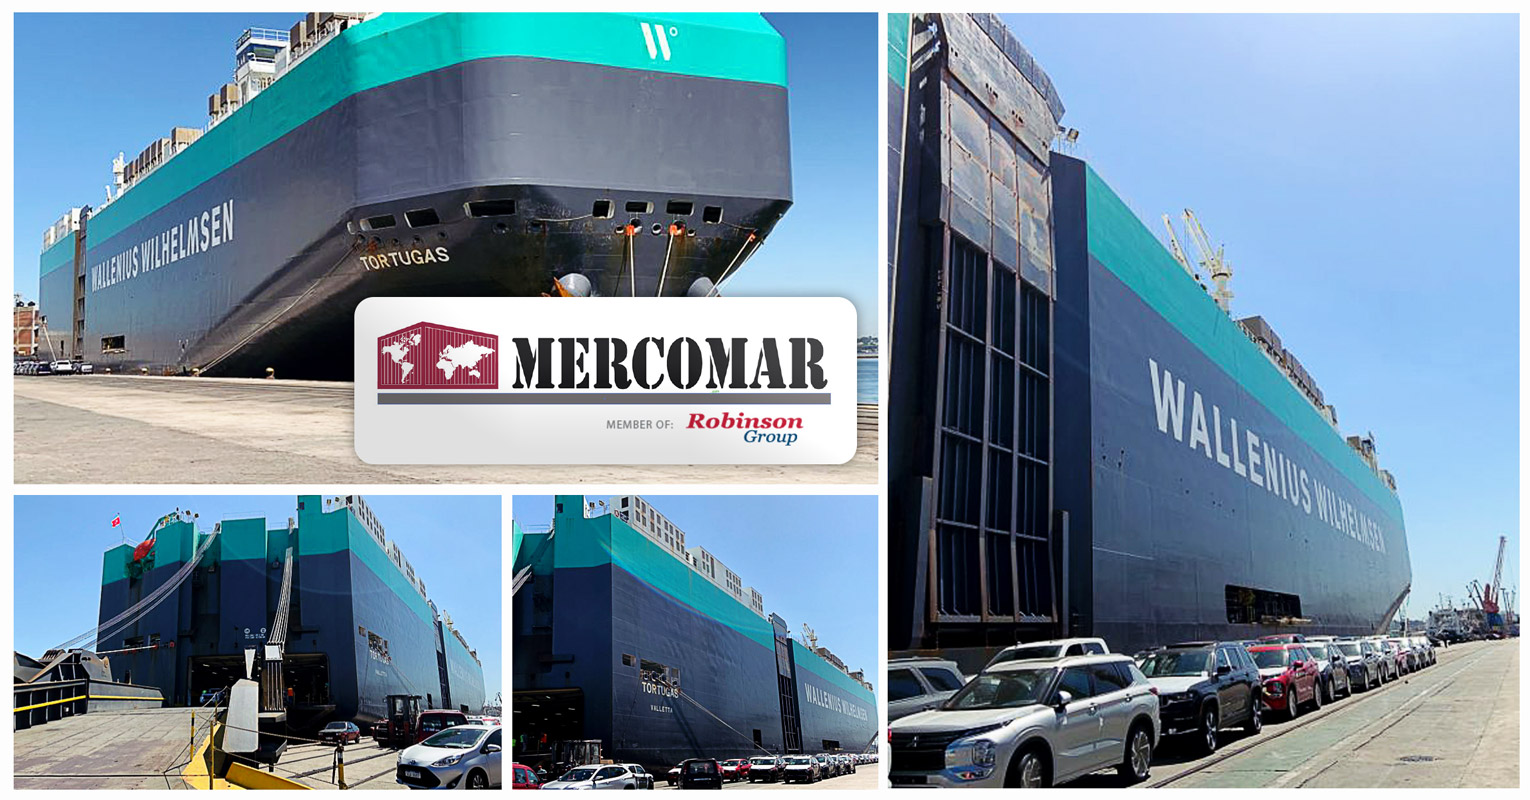 Mercomar Handled 16 Vehicles via RORO at Montevideo for a Client in Asuncion, Paraguay